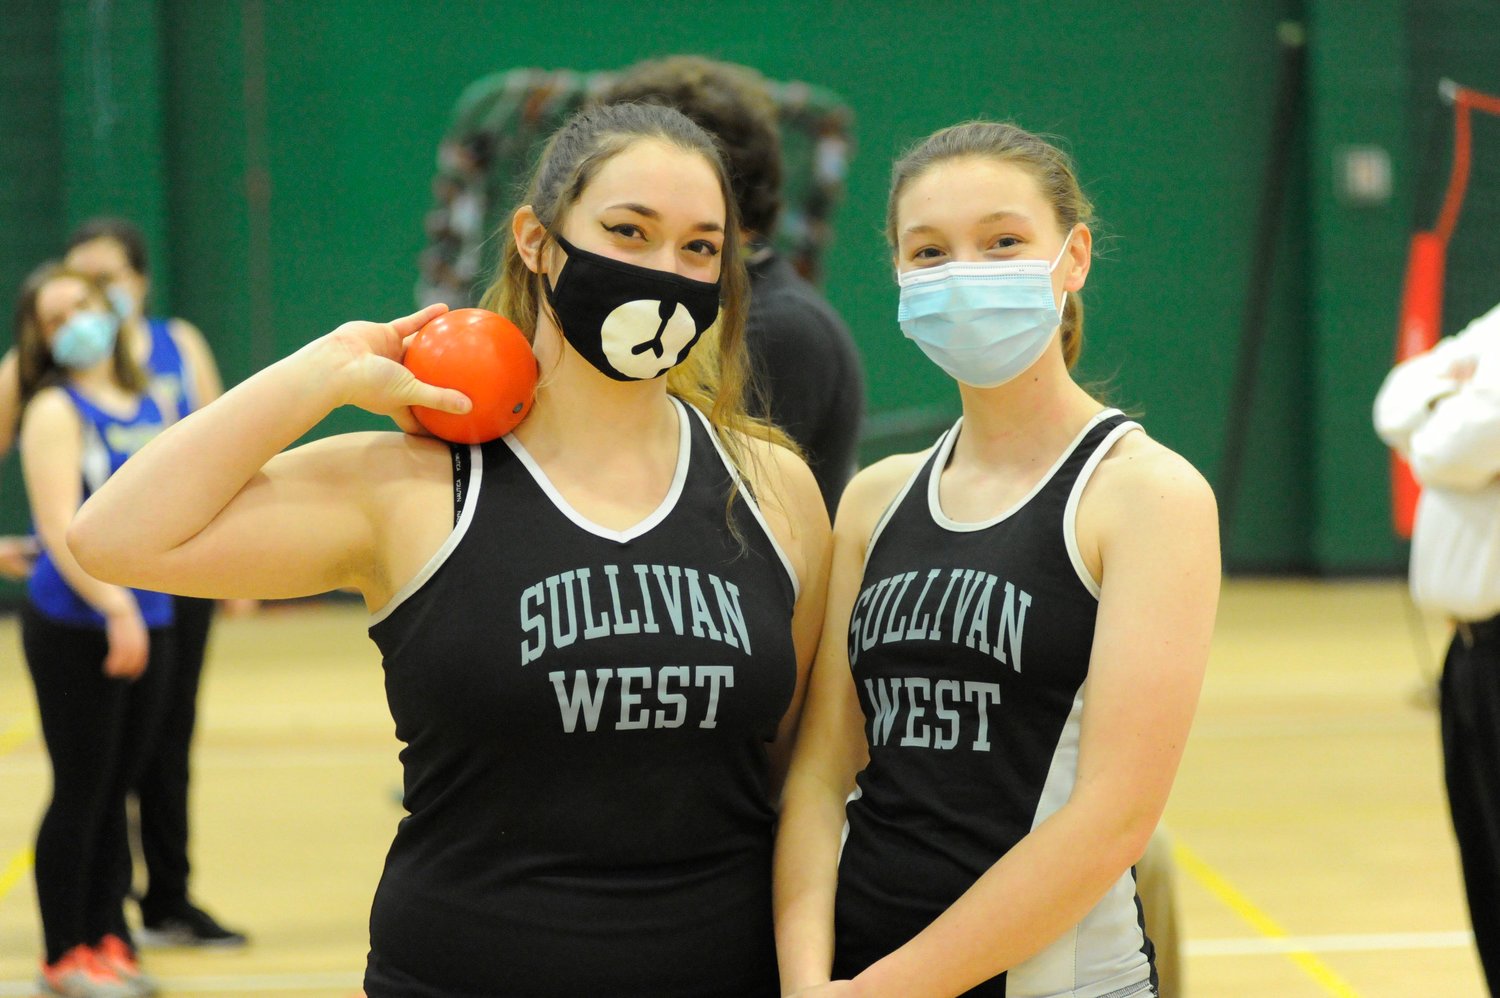 Double threat in shot put. Sullivan West’s Kathryn Widmann was tabbed the 2022 varsity girls' indoor track and field MVP, while her teammate Kaydence Everitt was selected for the 2022 Coaches Award.